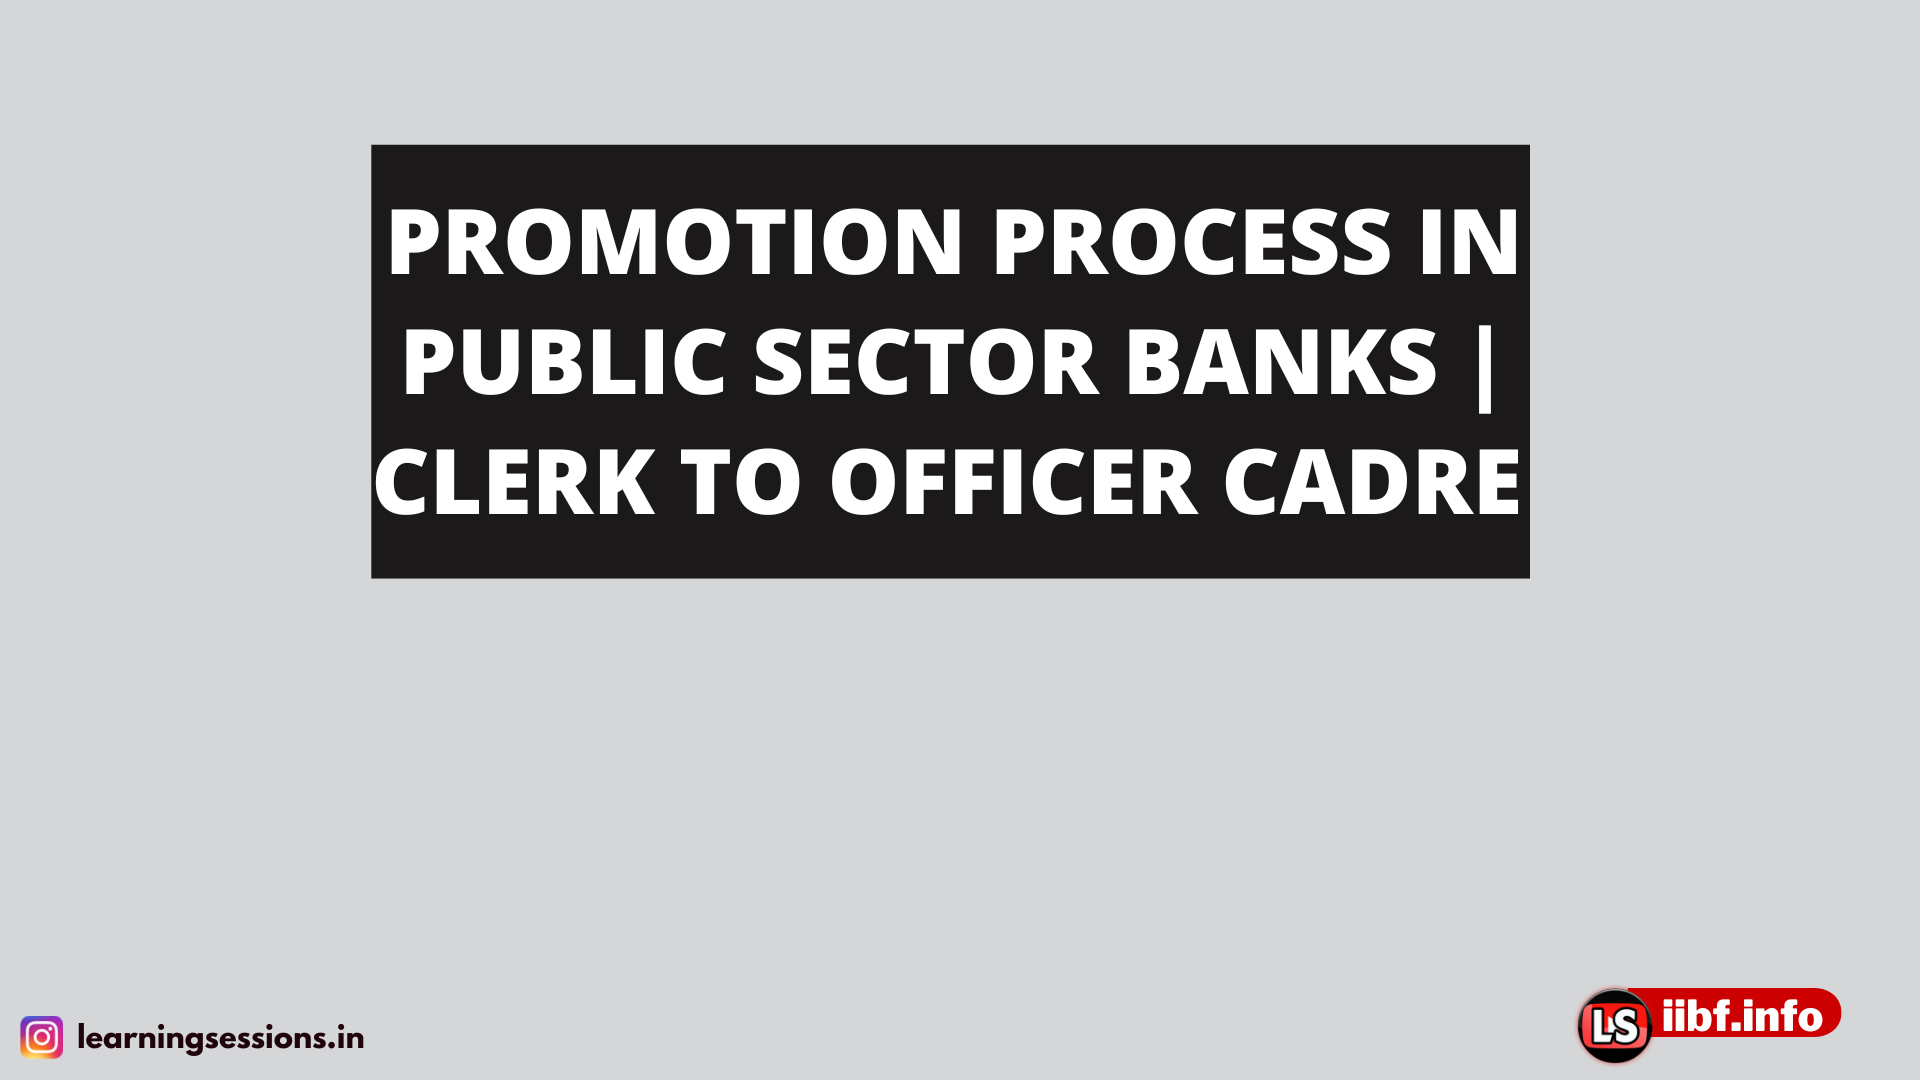 PROMOTION PROCESS IN PUBLIC SECTOR BANKS | CLERK TO OFFICER CADRE